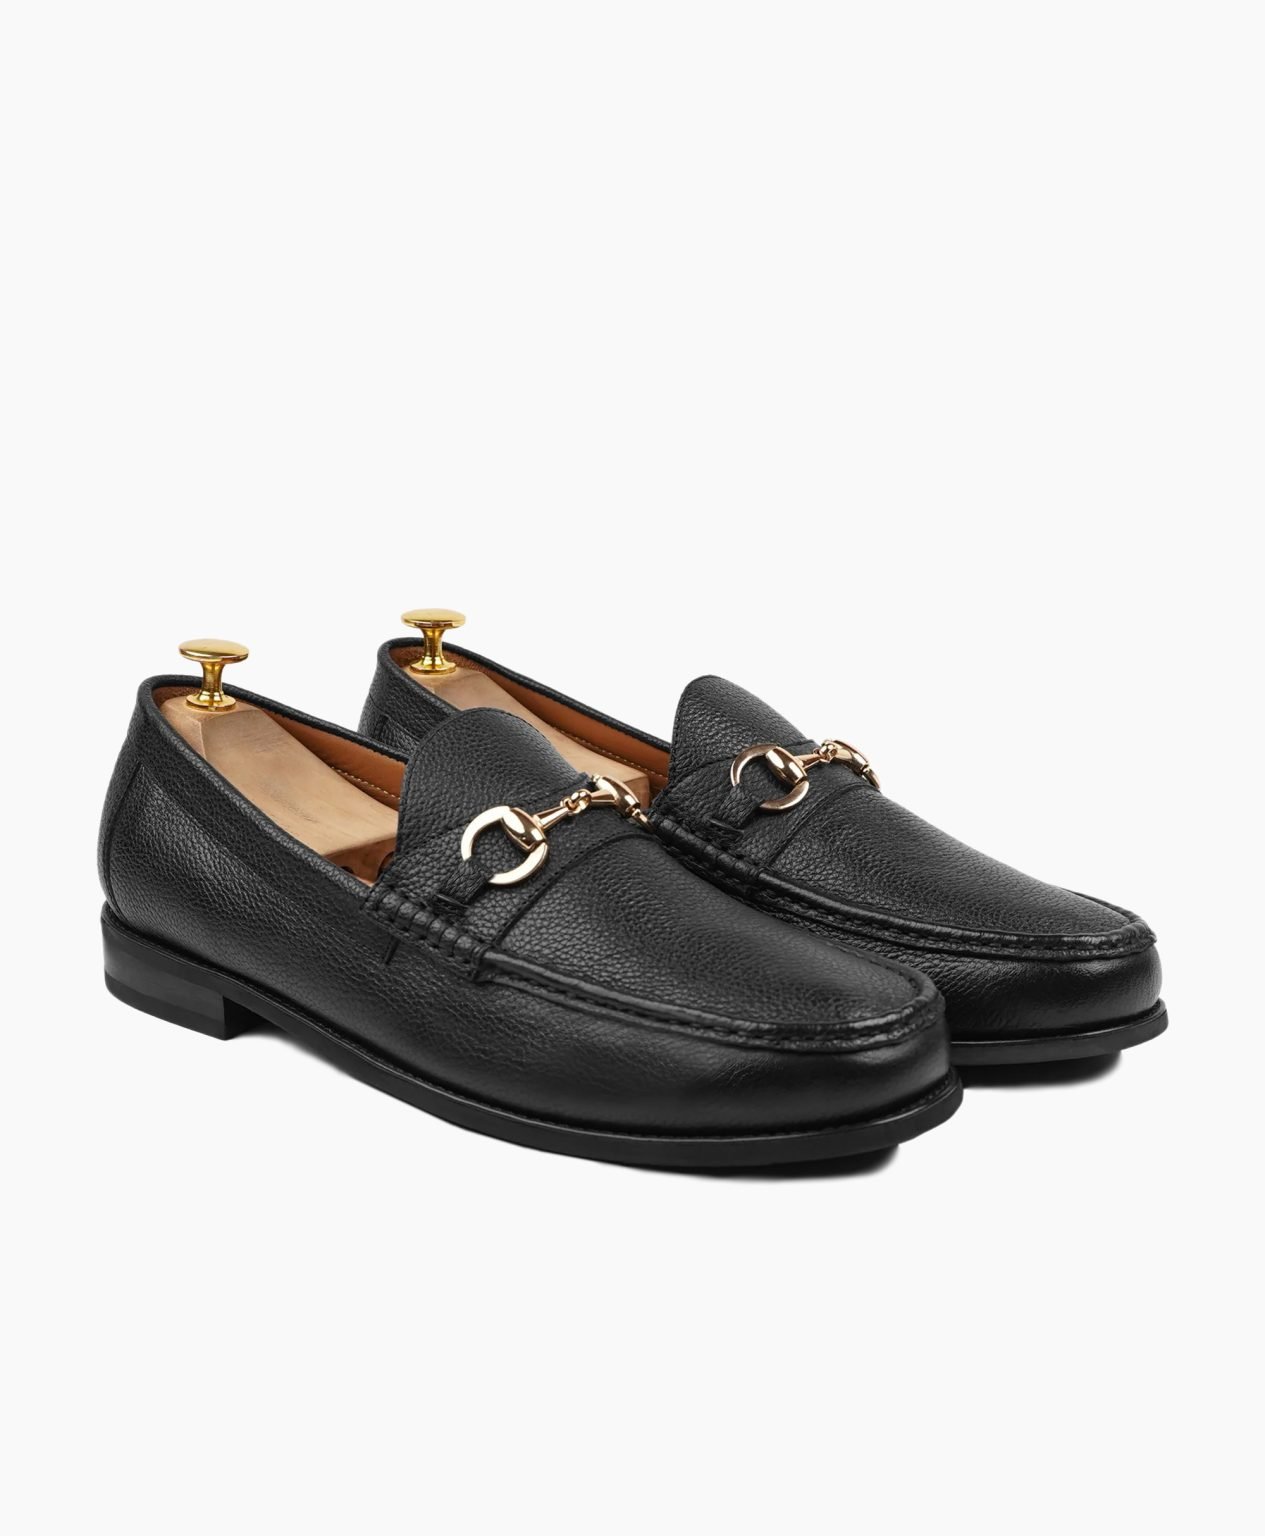 repton-black-leather-loafers-image200